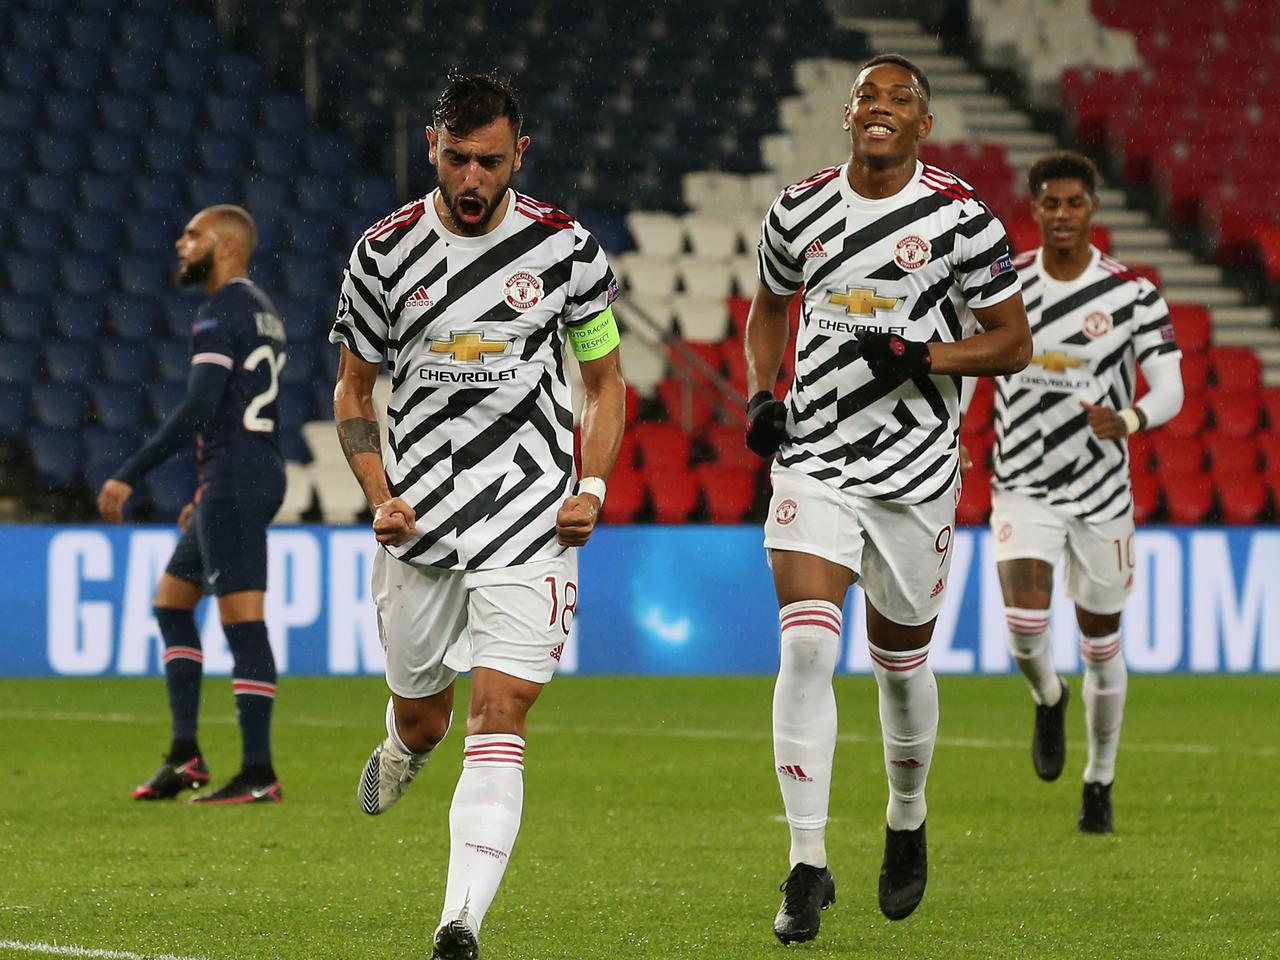 Psg 1-2 Man Utd Match Highlights And Reaction Videos 20 October 2020 | Manchester  United